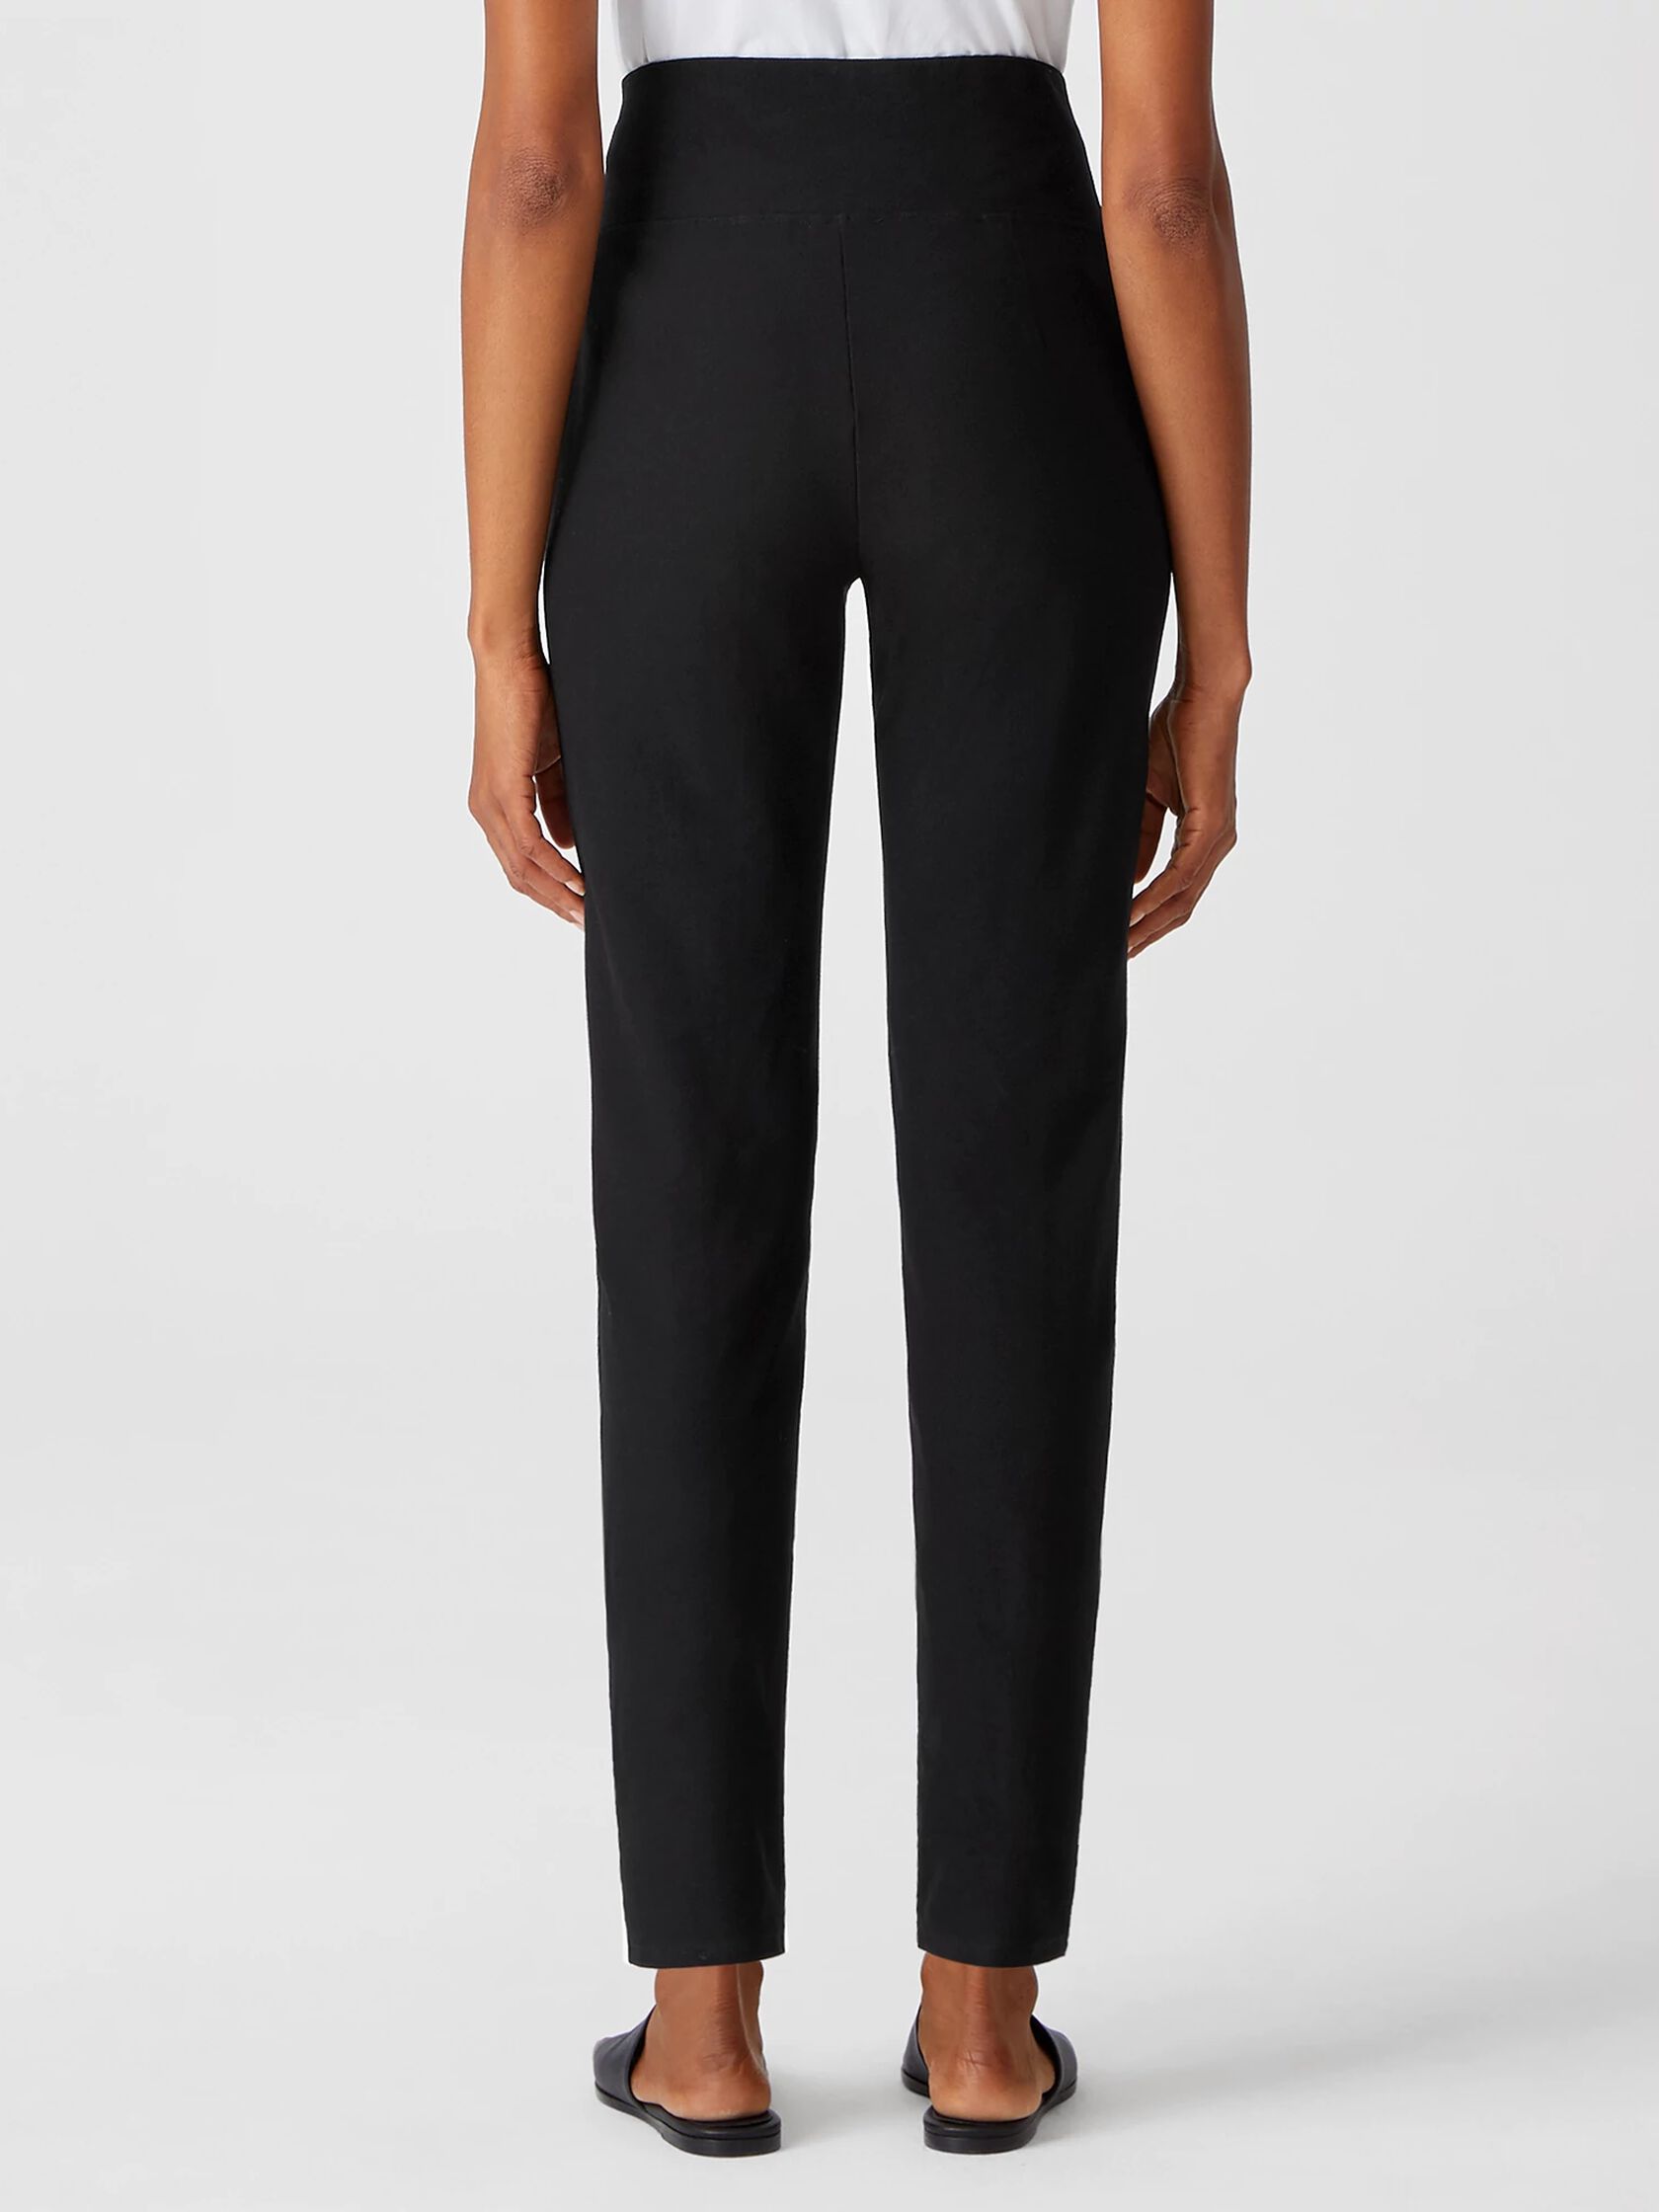 Washable Stretch Crepe High Waisted Pant